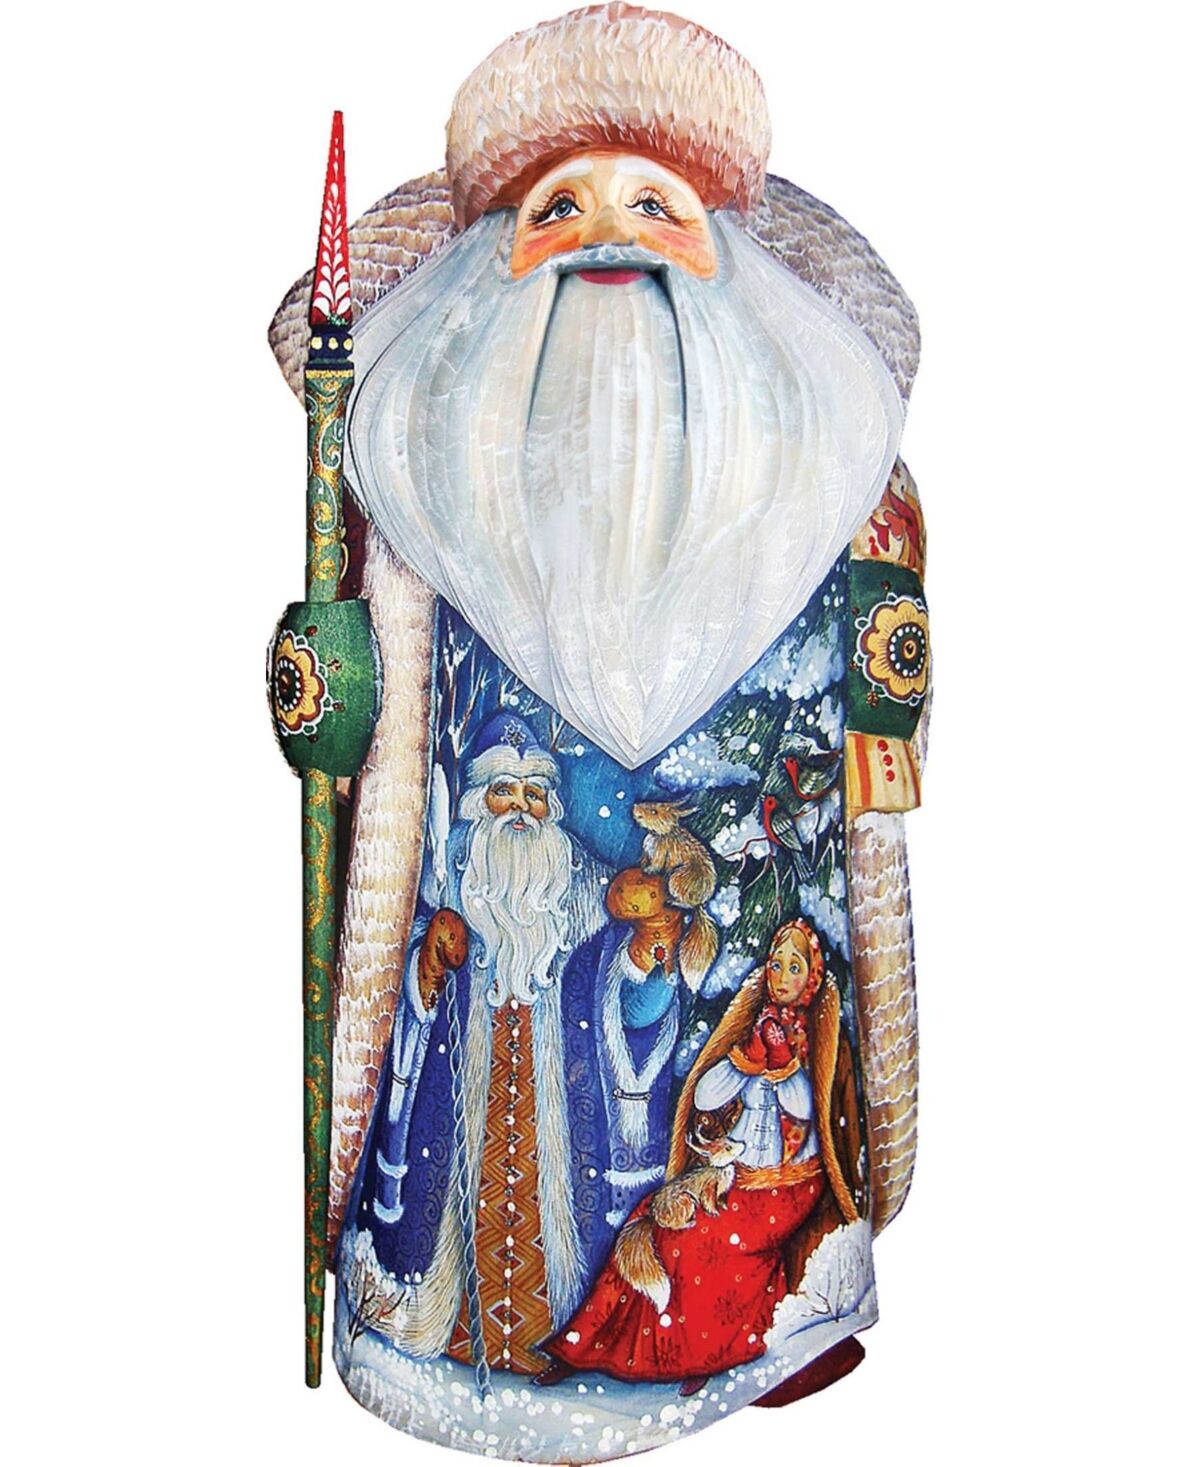 G.DeBrekht Woodcarved and Hand Painted Christmas Night Father Frost Santa Claus Figurine - Multi